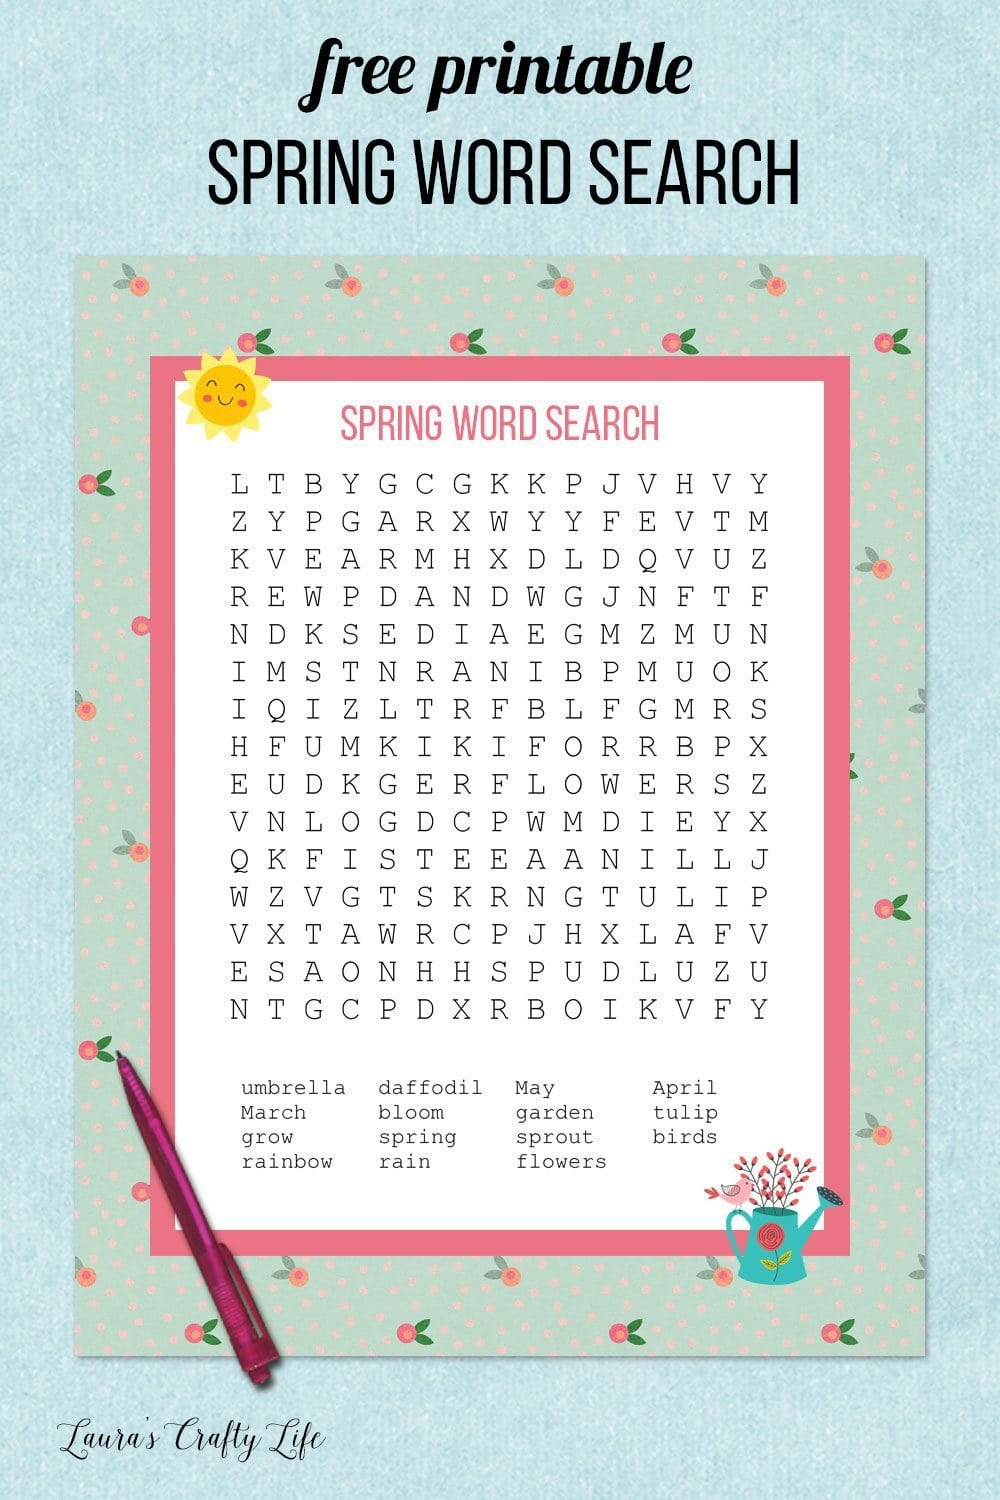 Free printable spring word search